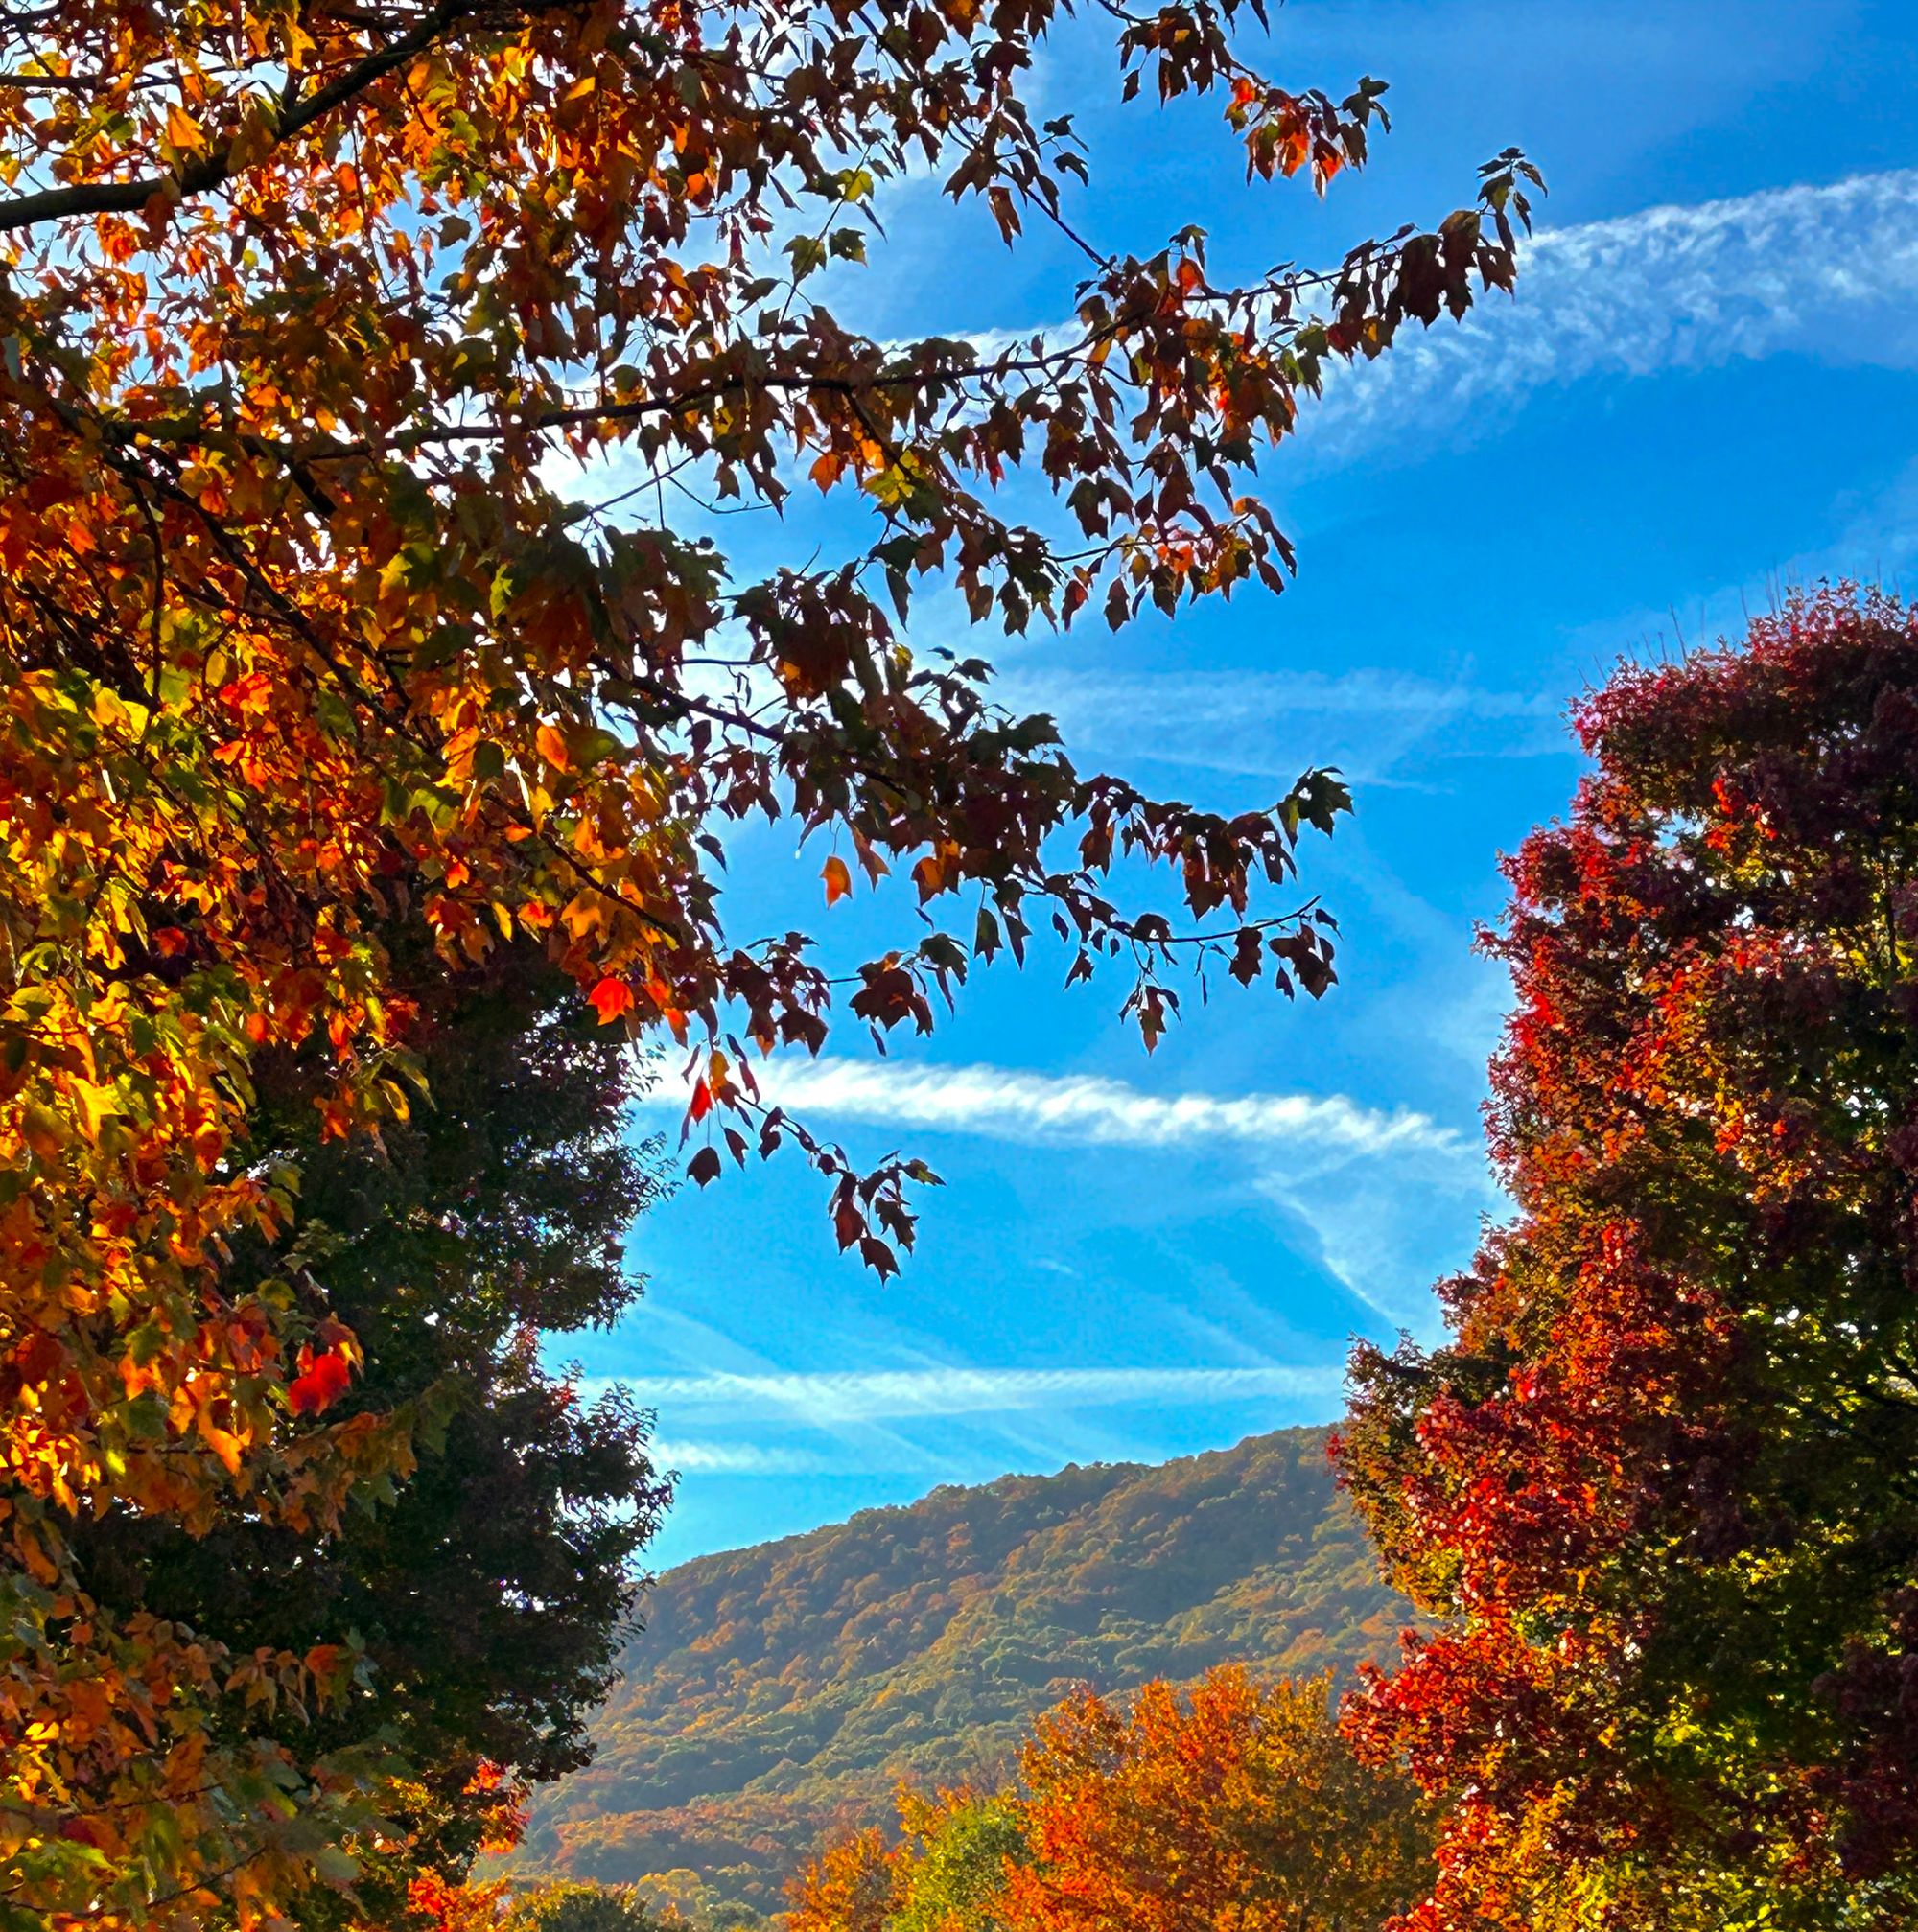 autumn leaves with a mountain and sky in the background